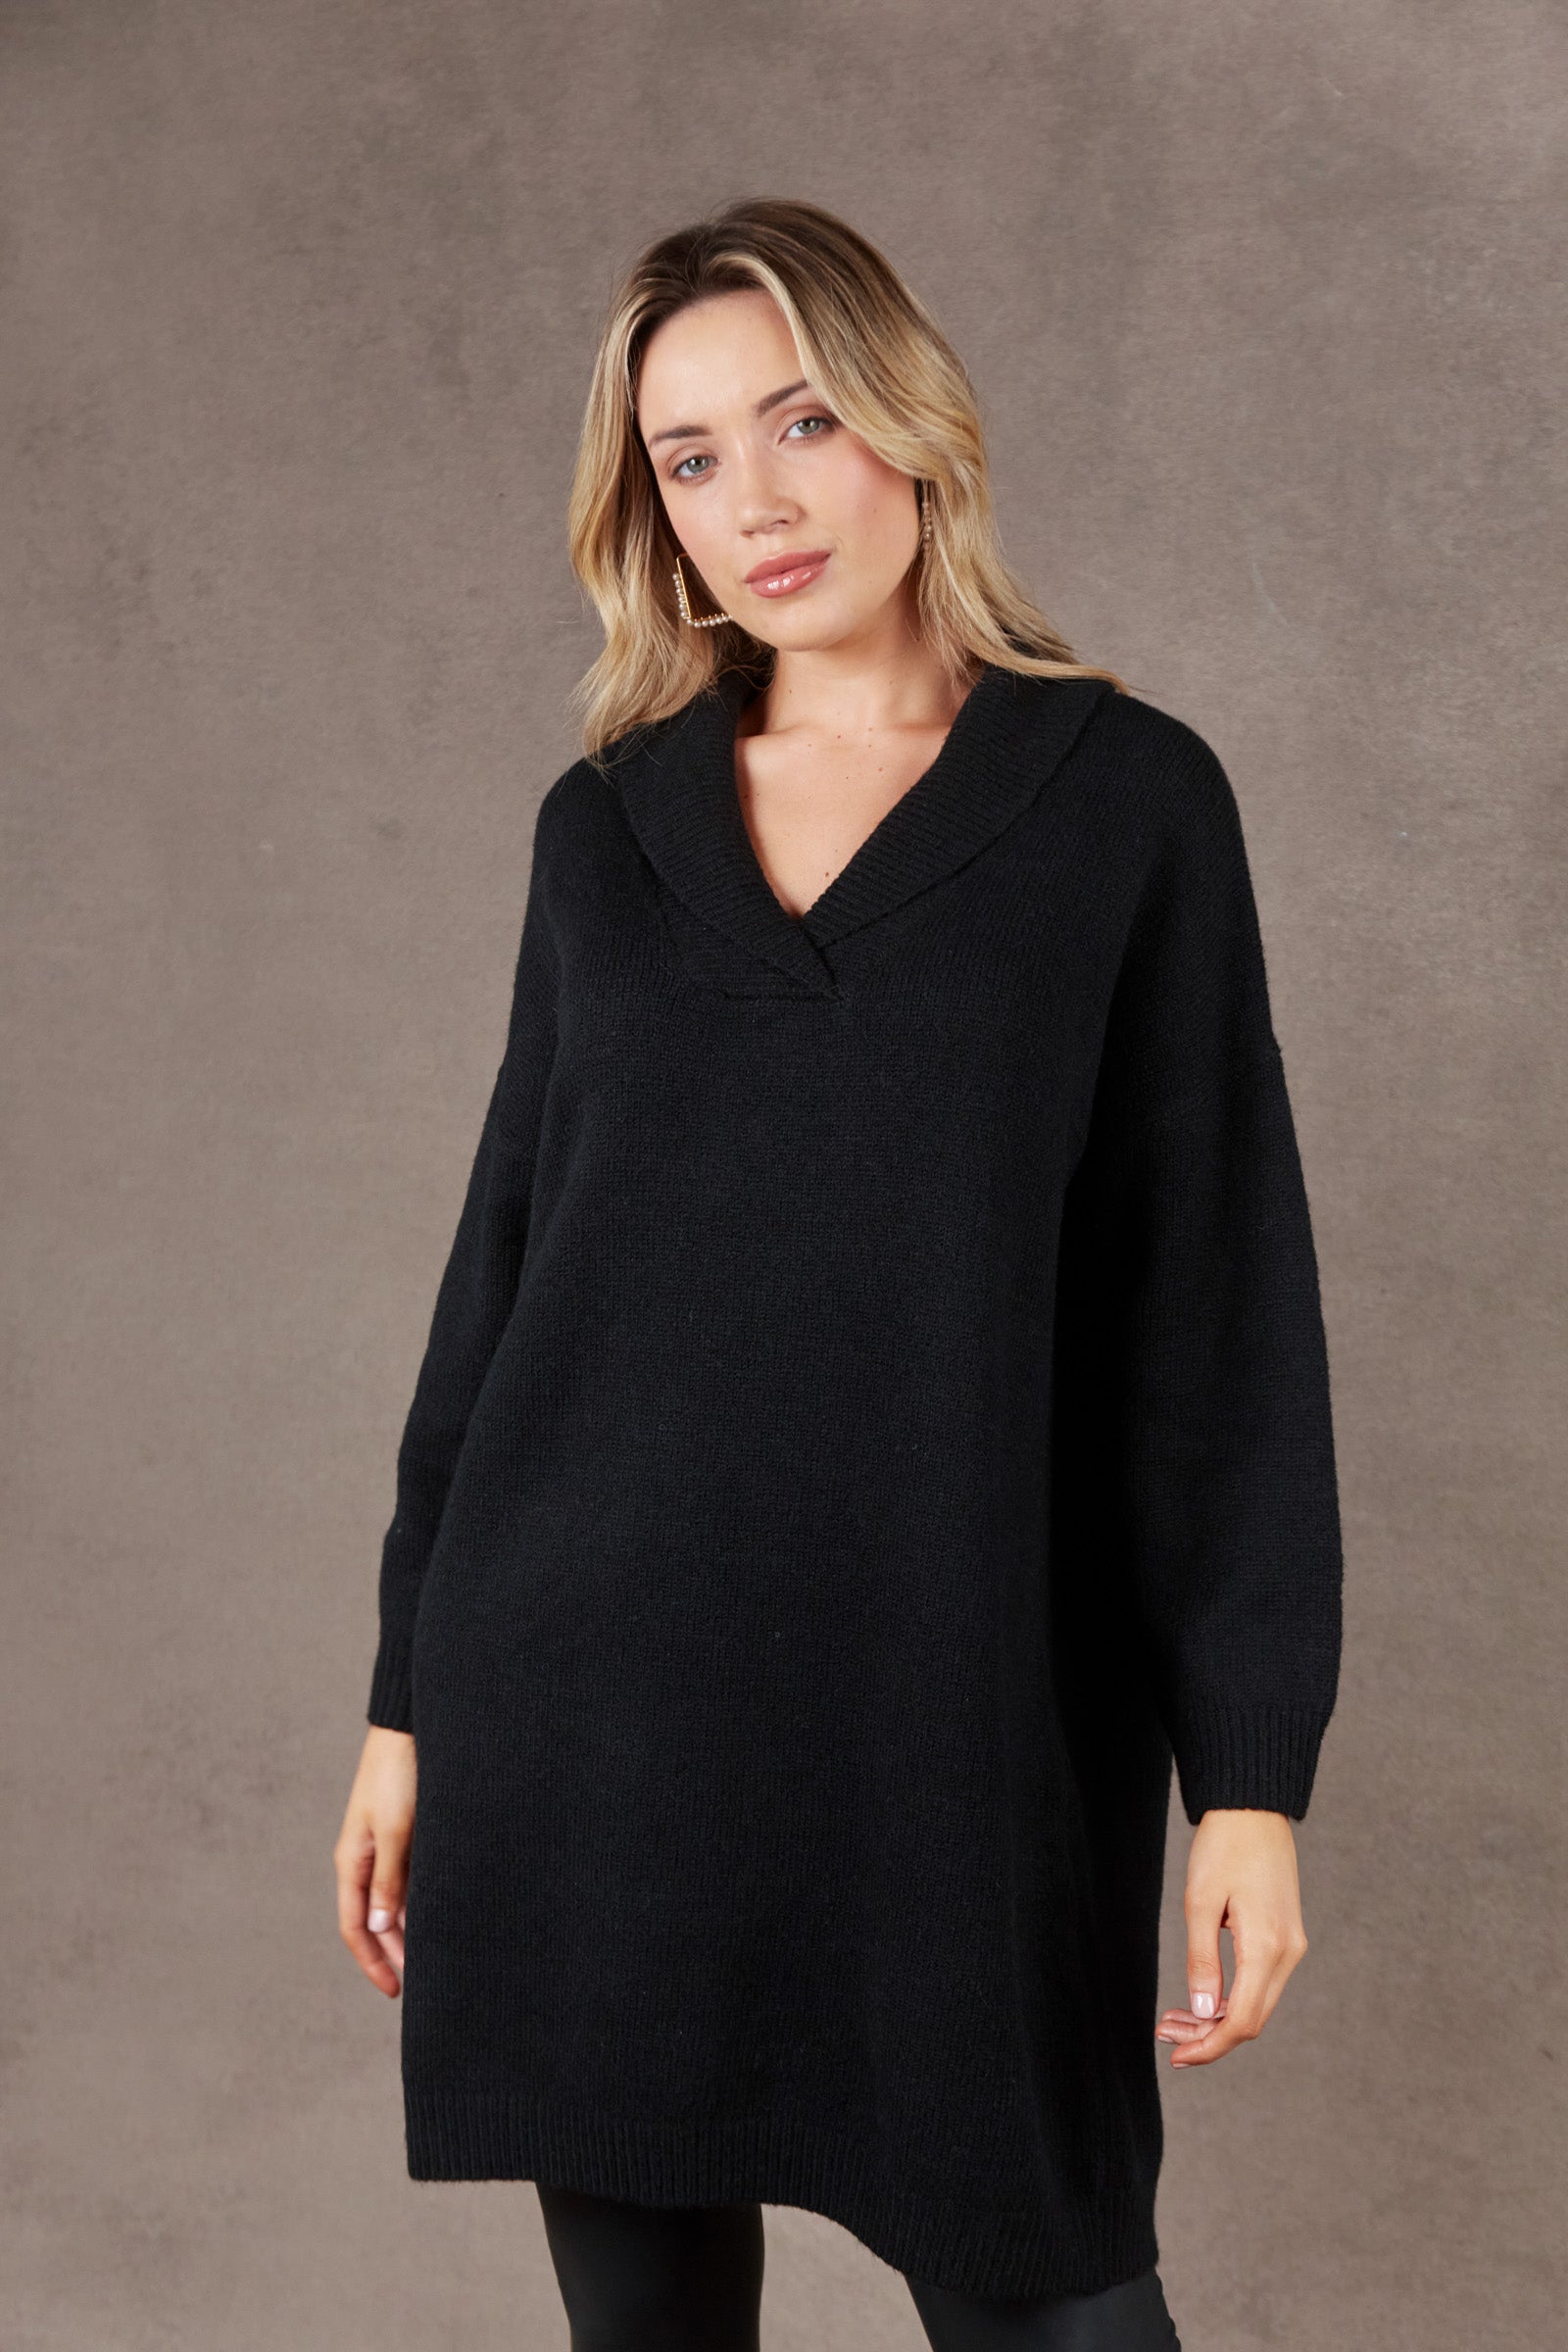 Paarl Top/Dress - Ebony - eb&ive Clothing - Knit Jumper One Size